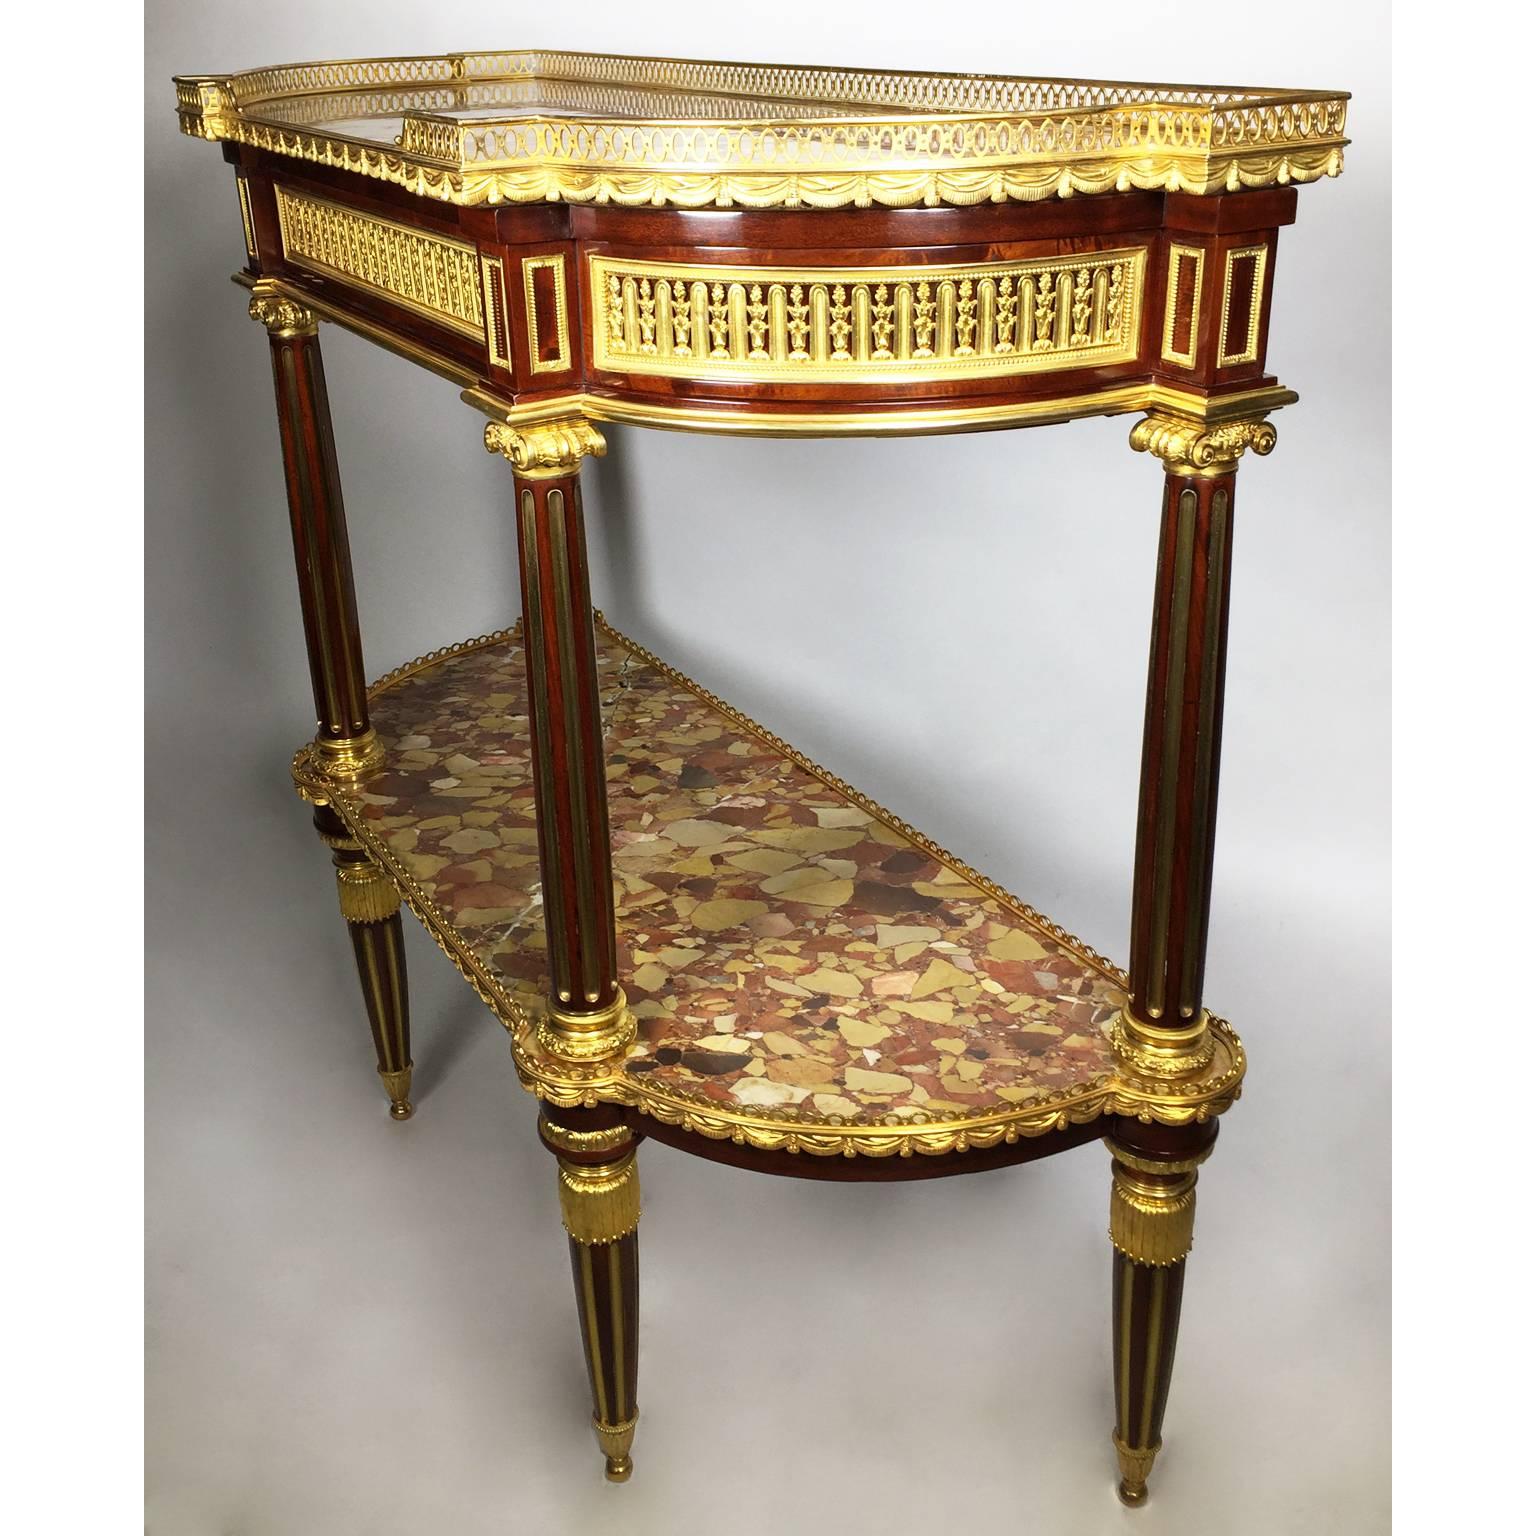 A fine French 19th century Louis XVI style gilt bronze-mounted mahogany two-tier demilune console Desserte in the manner of Jean Baptiste Vassou, maître in 1767 and Jacques-Antoine Leclere, maître in 1780. The demilune galleried Brêche d'Alep